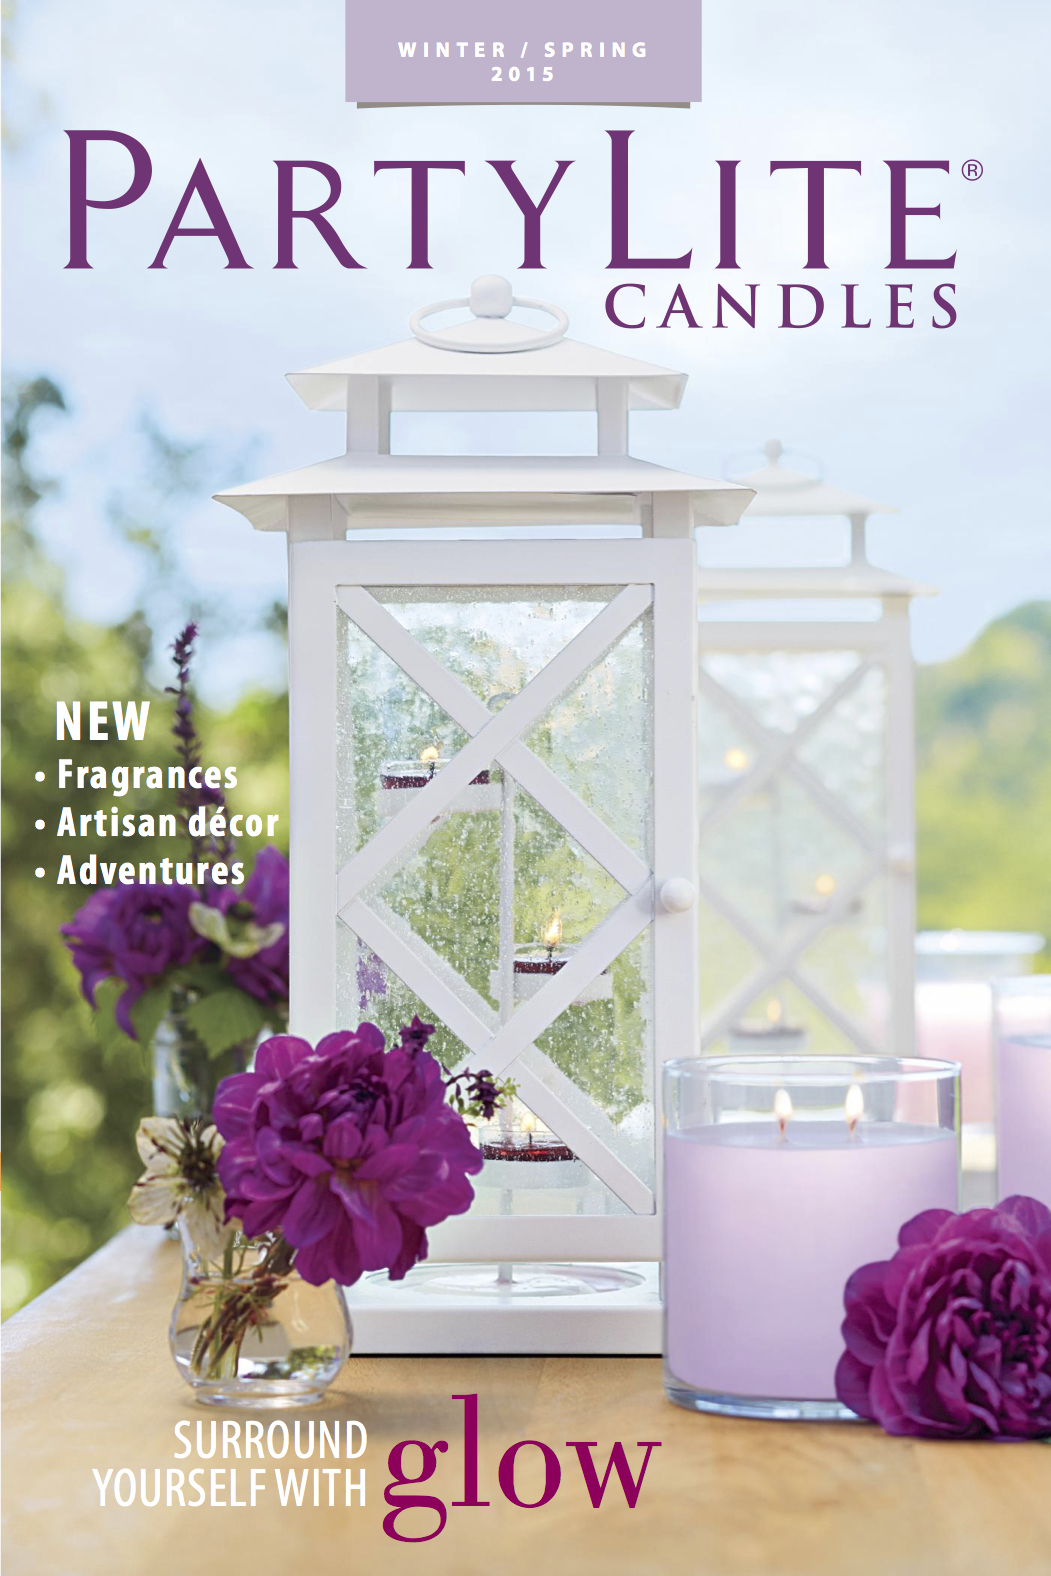 PartyLite Offers More of What Everyone Loves in Fragrance and Home